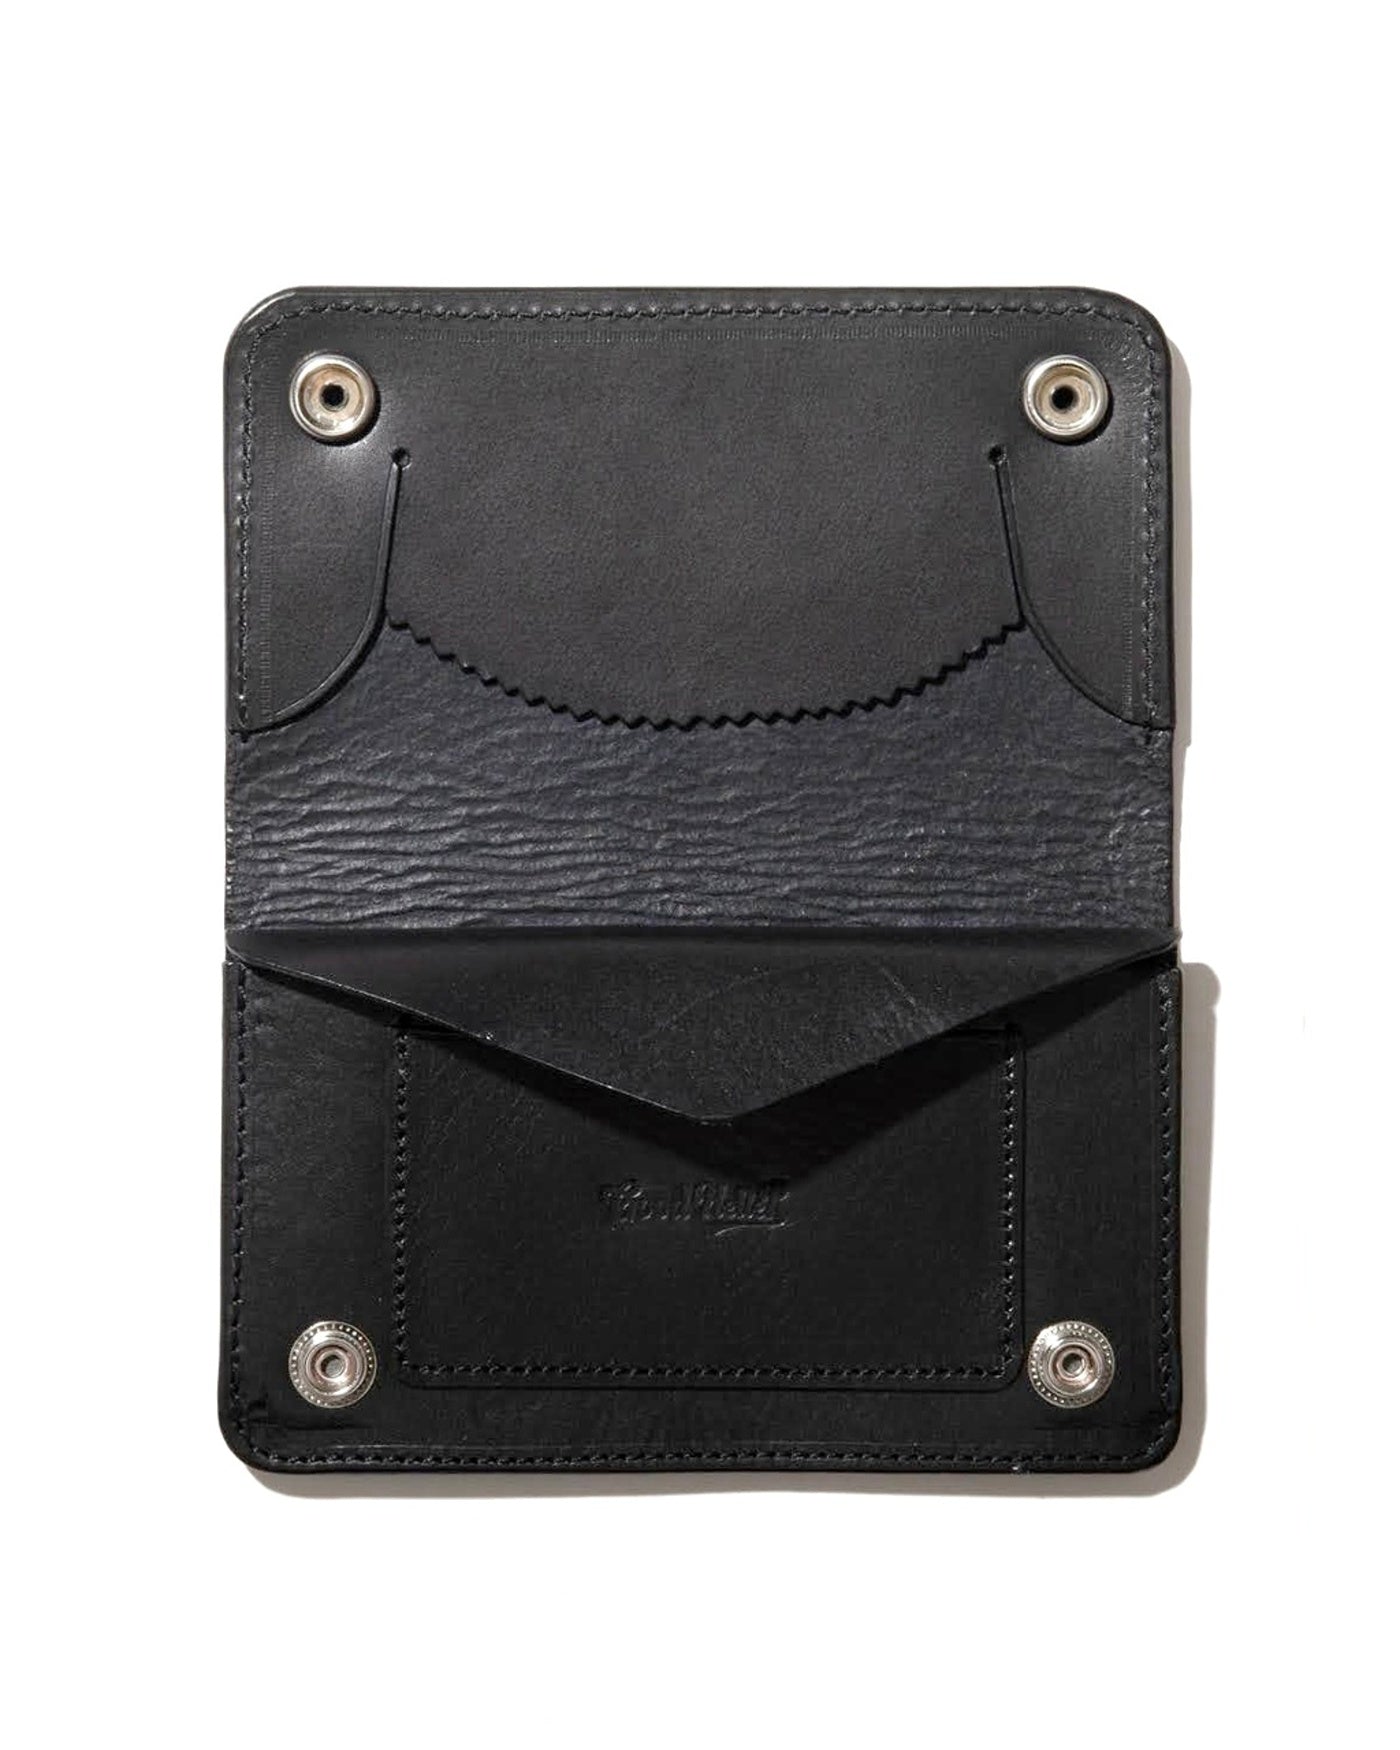 GOOD HELLER | SILVER SNAP BUTTONS MIDDLE WALLET